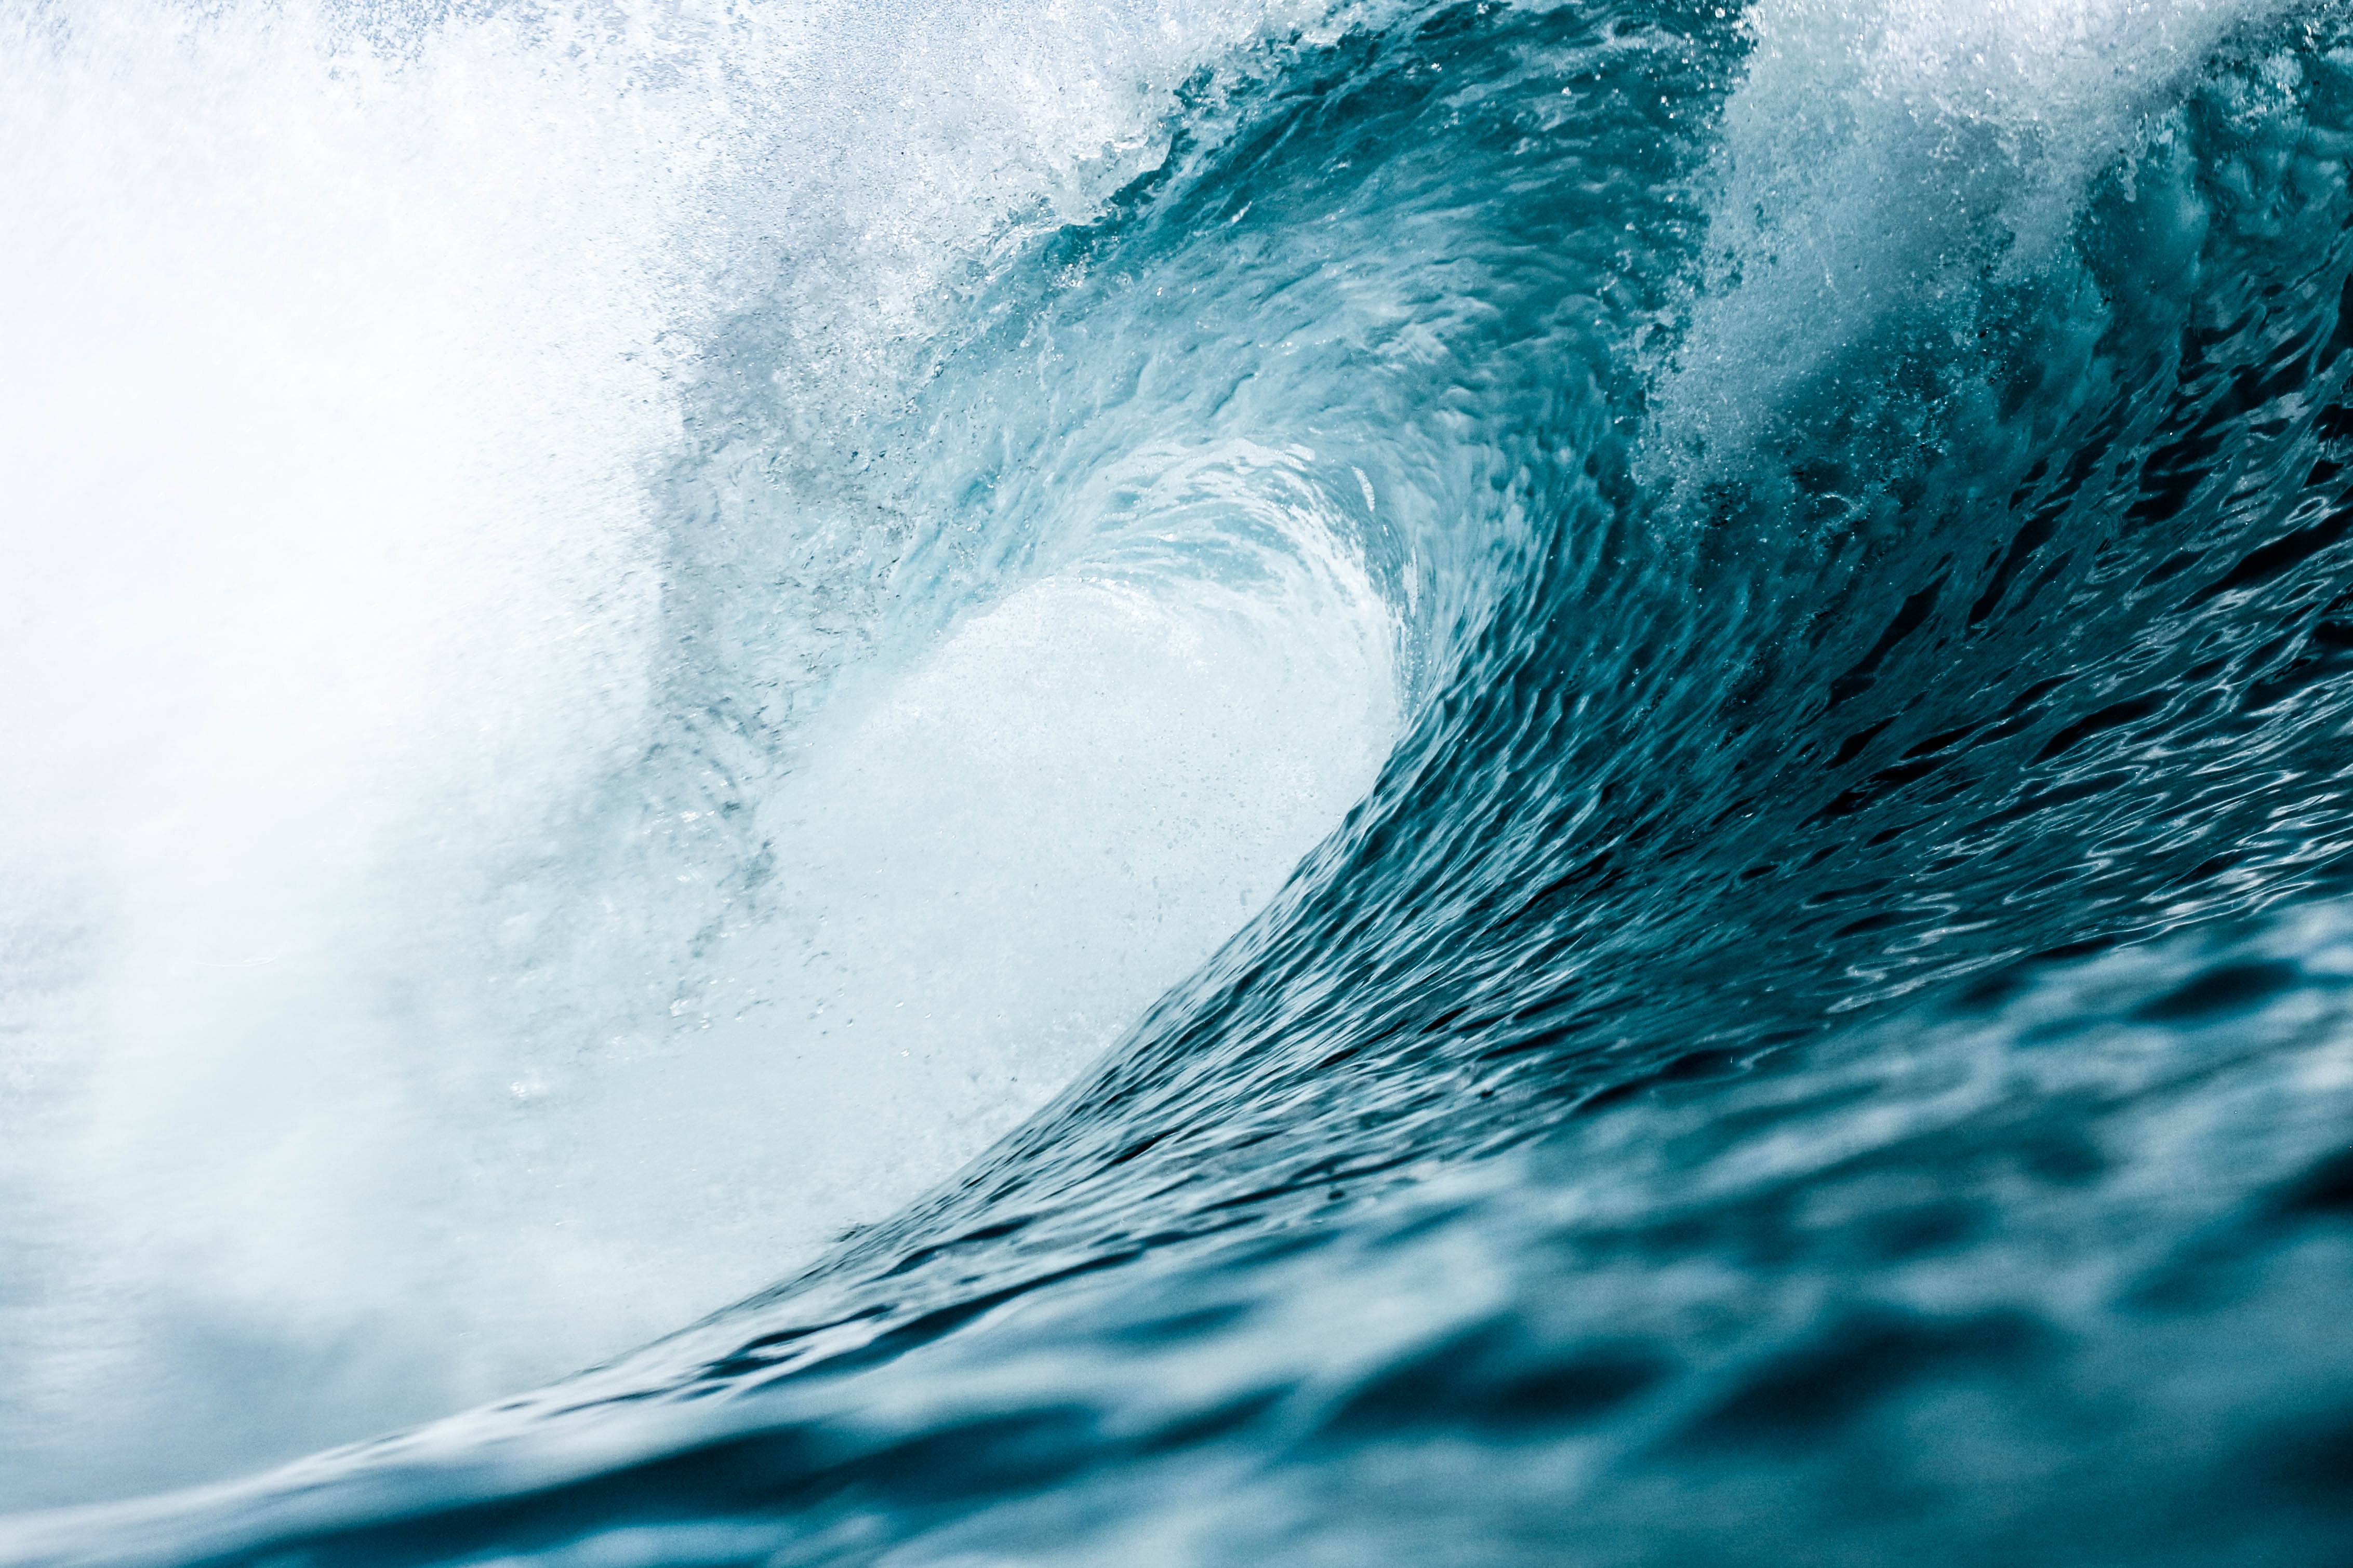 Surf's Up – How Ocean Waves, Tides, And Temps Can Help Power The World | GE News